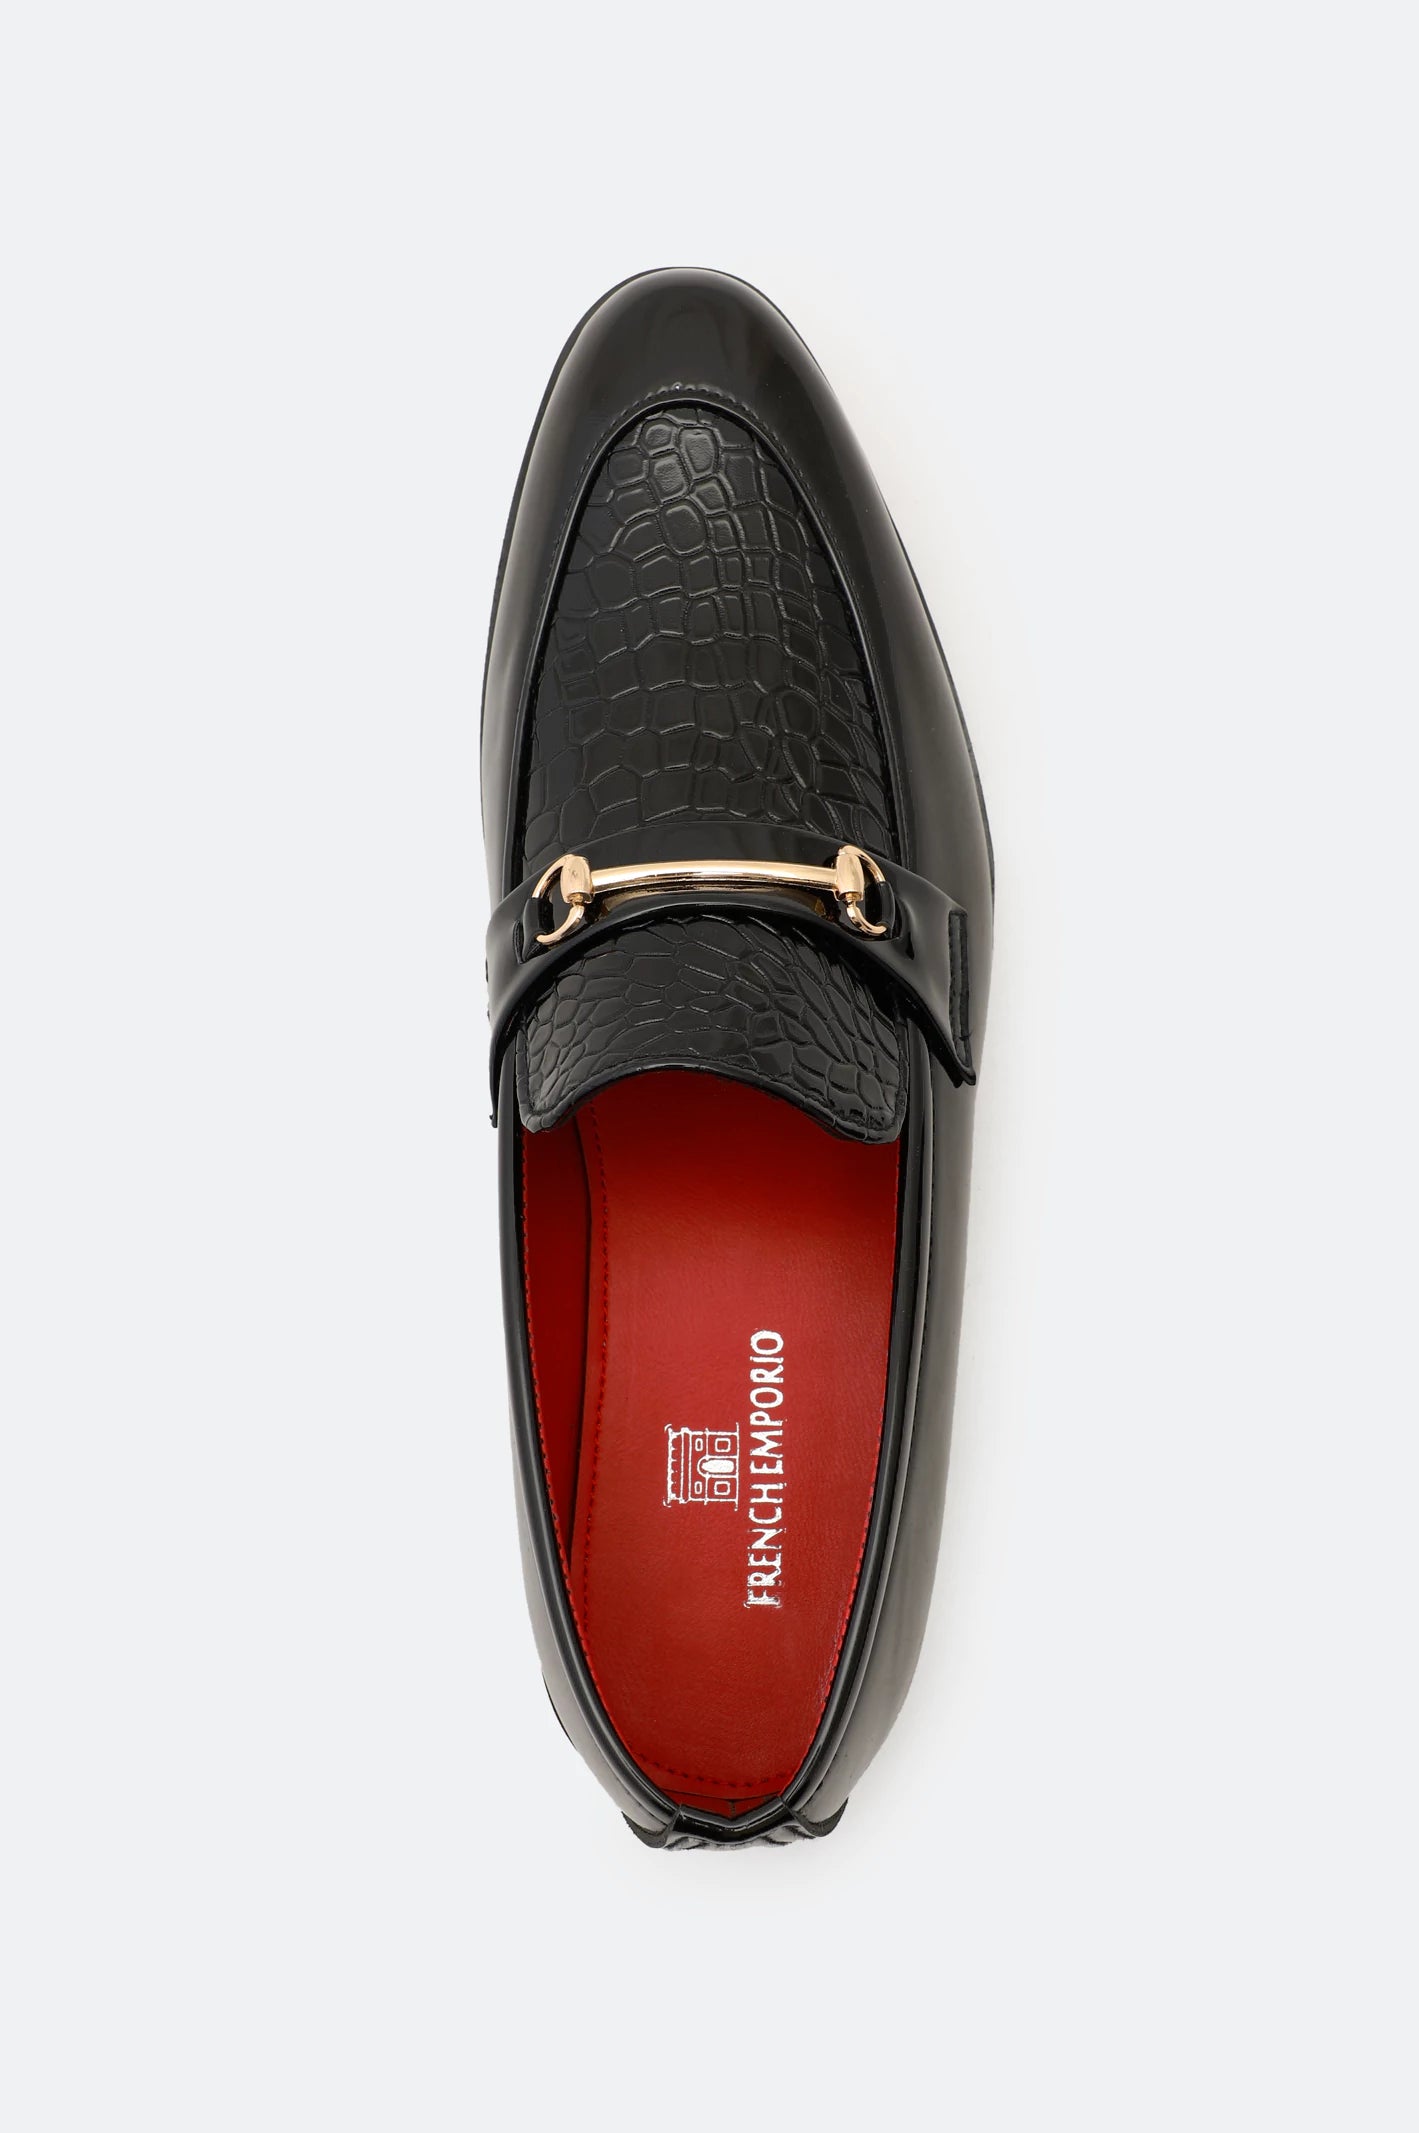 Black Formal Shoes From Diners